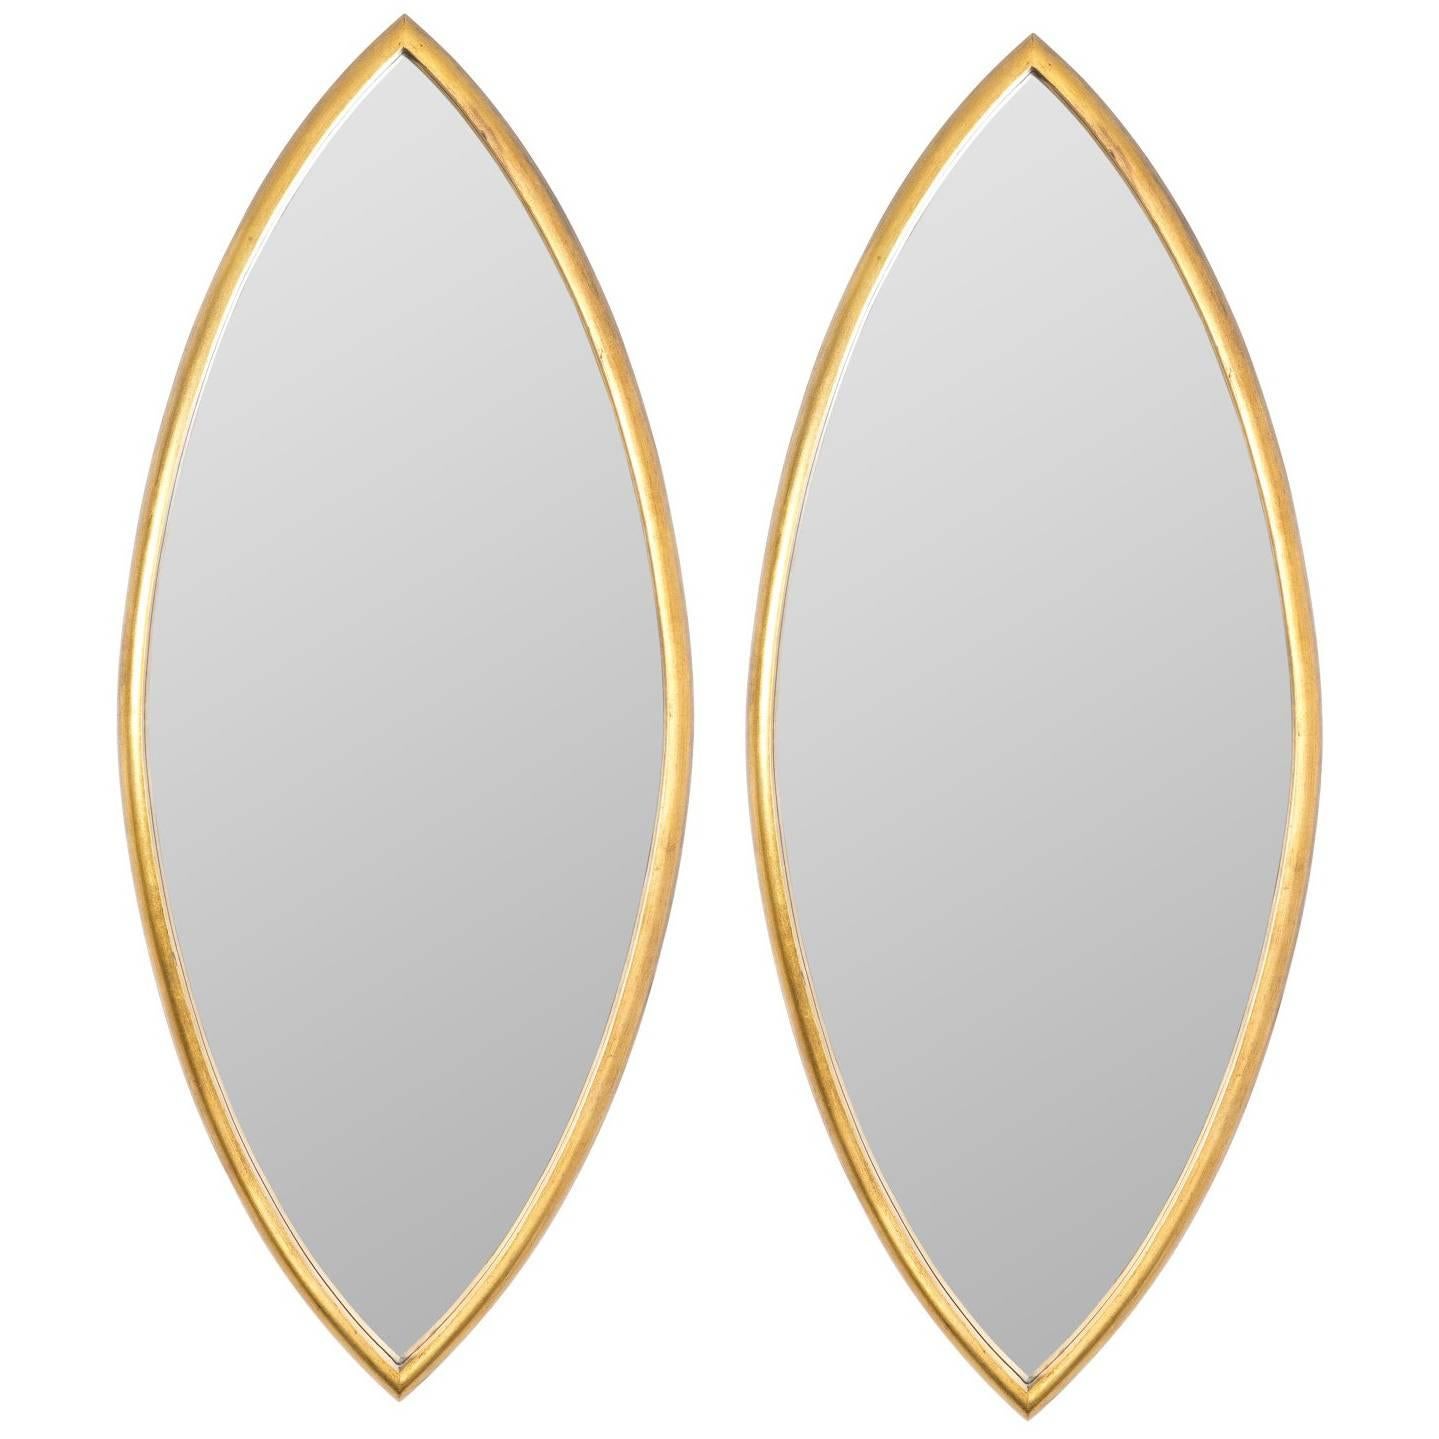 Pair of Hollywood Regency Giltwood Mirrors For Sale